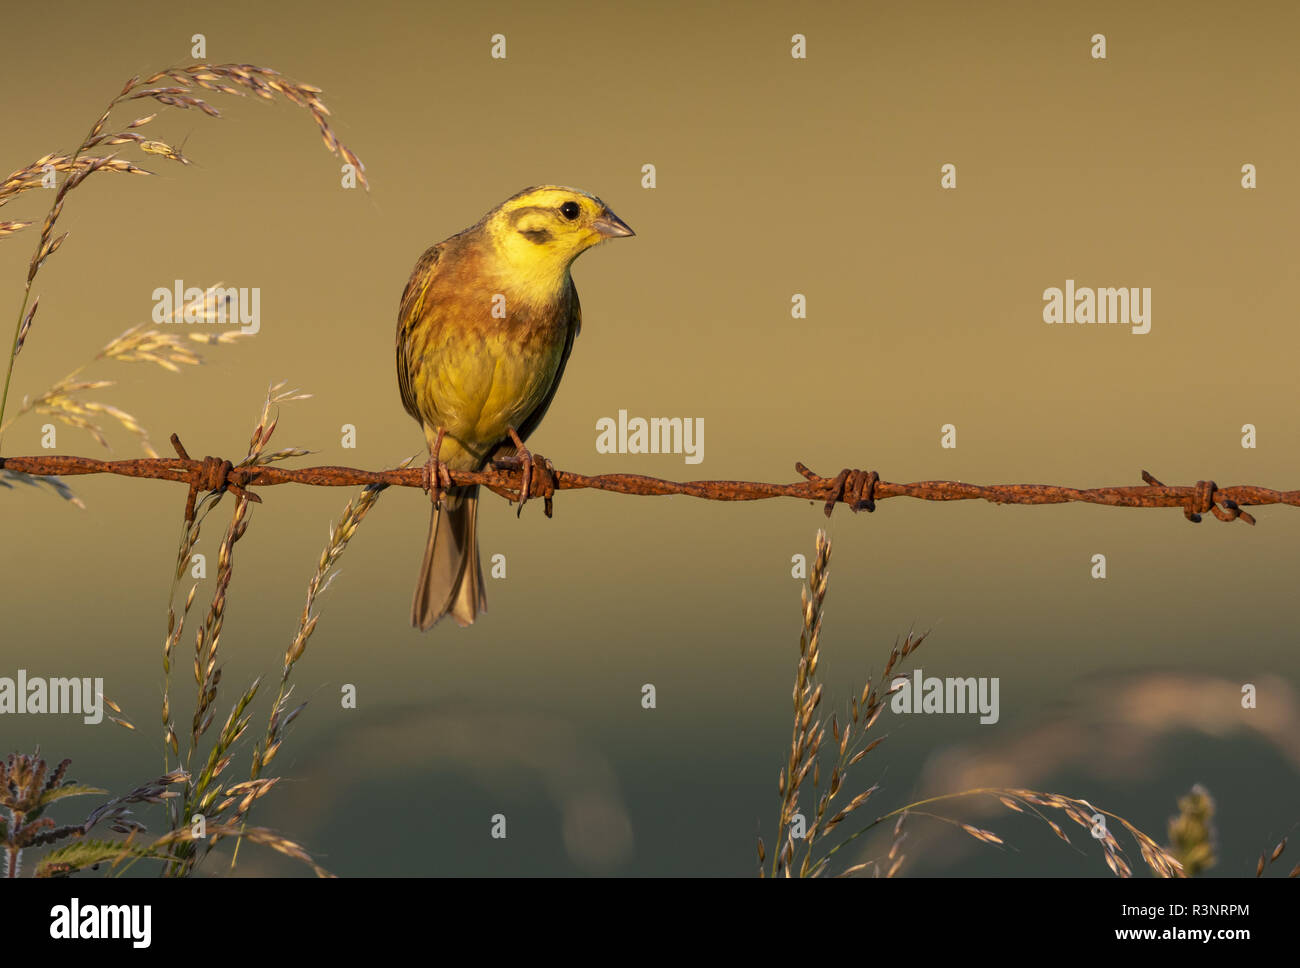 Yellowhammer (Emberiza citrinella) perched on a barbed wire at sunset, England Stock Photo